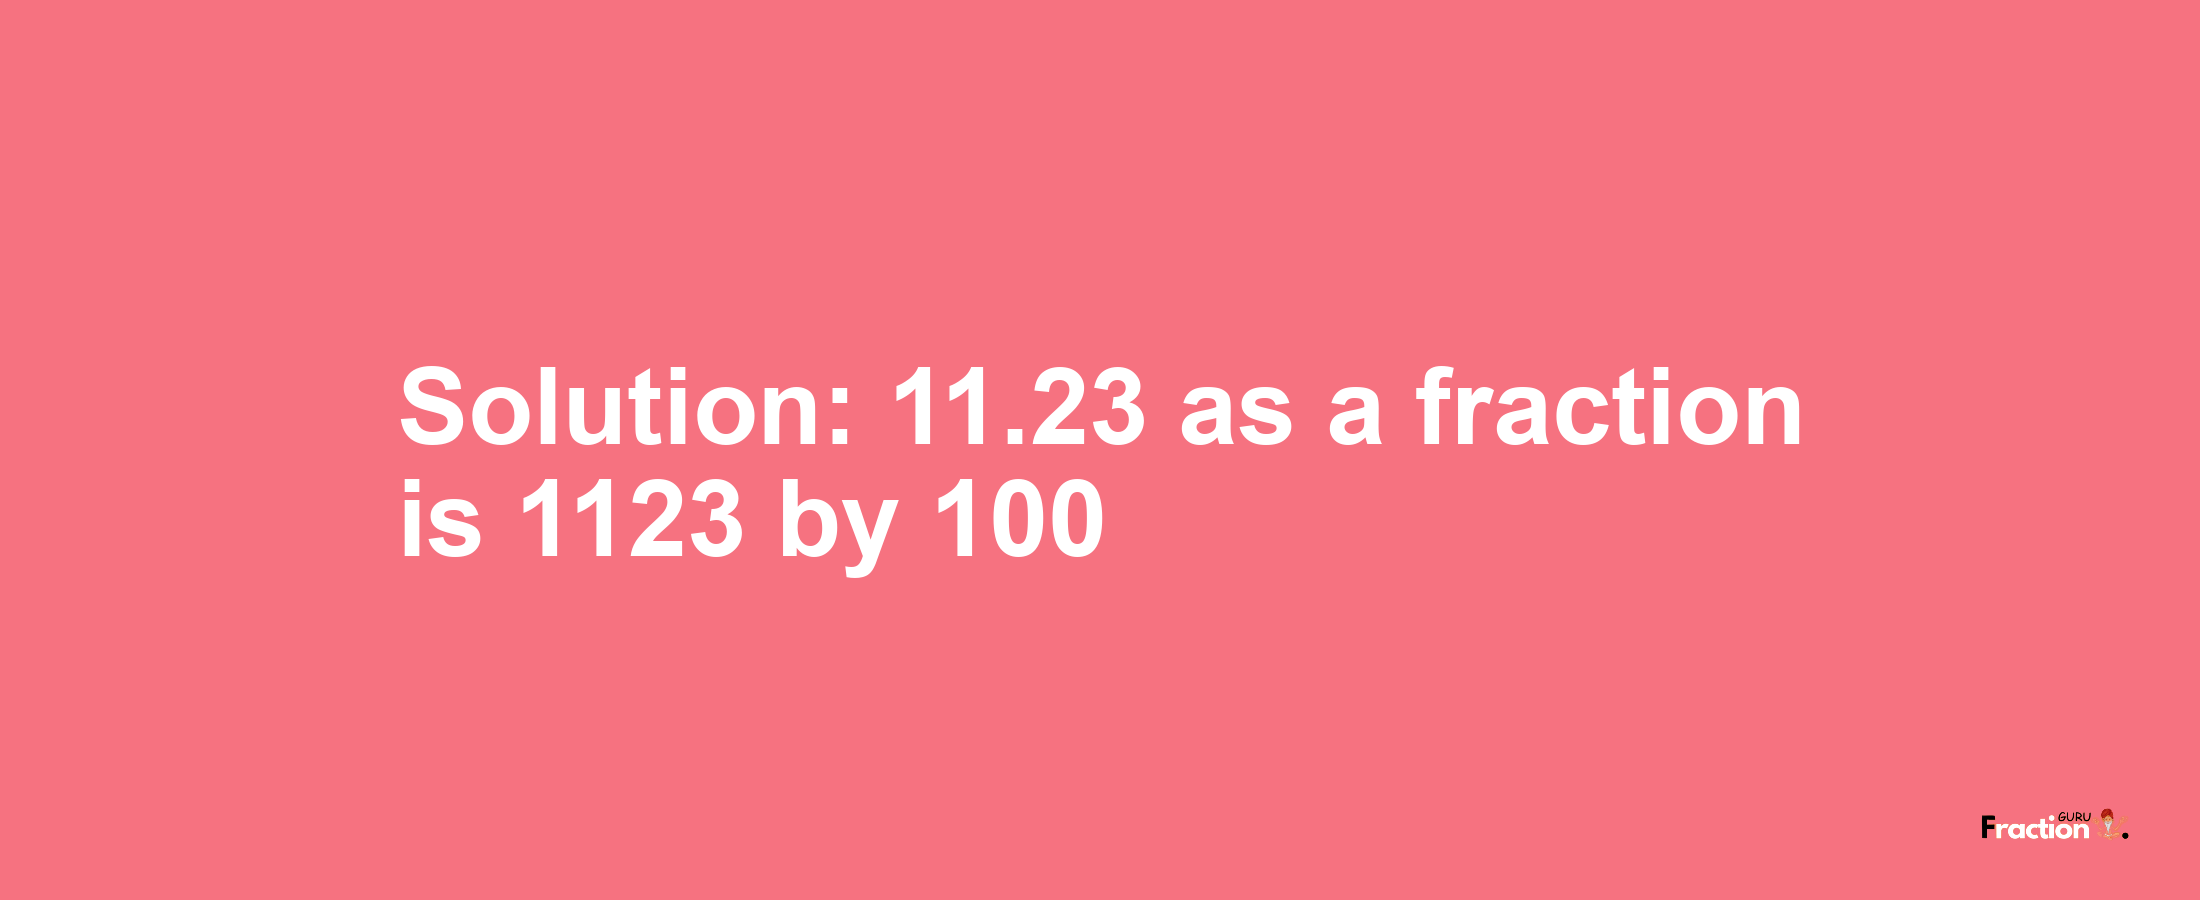 Solution:11.23 as a fraction is 1123/100